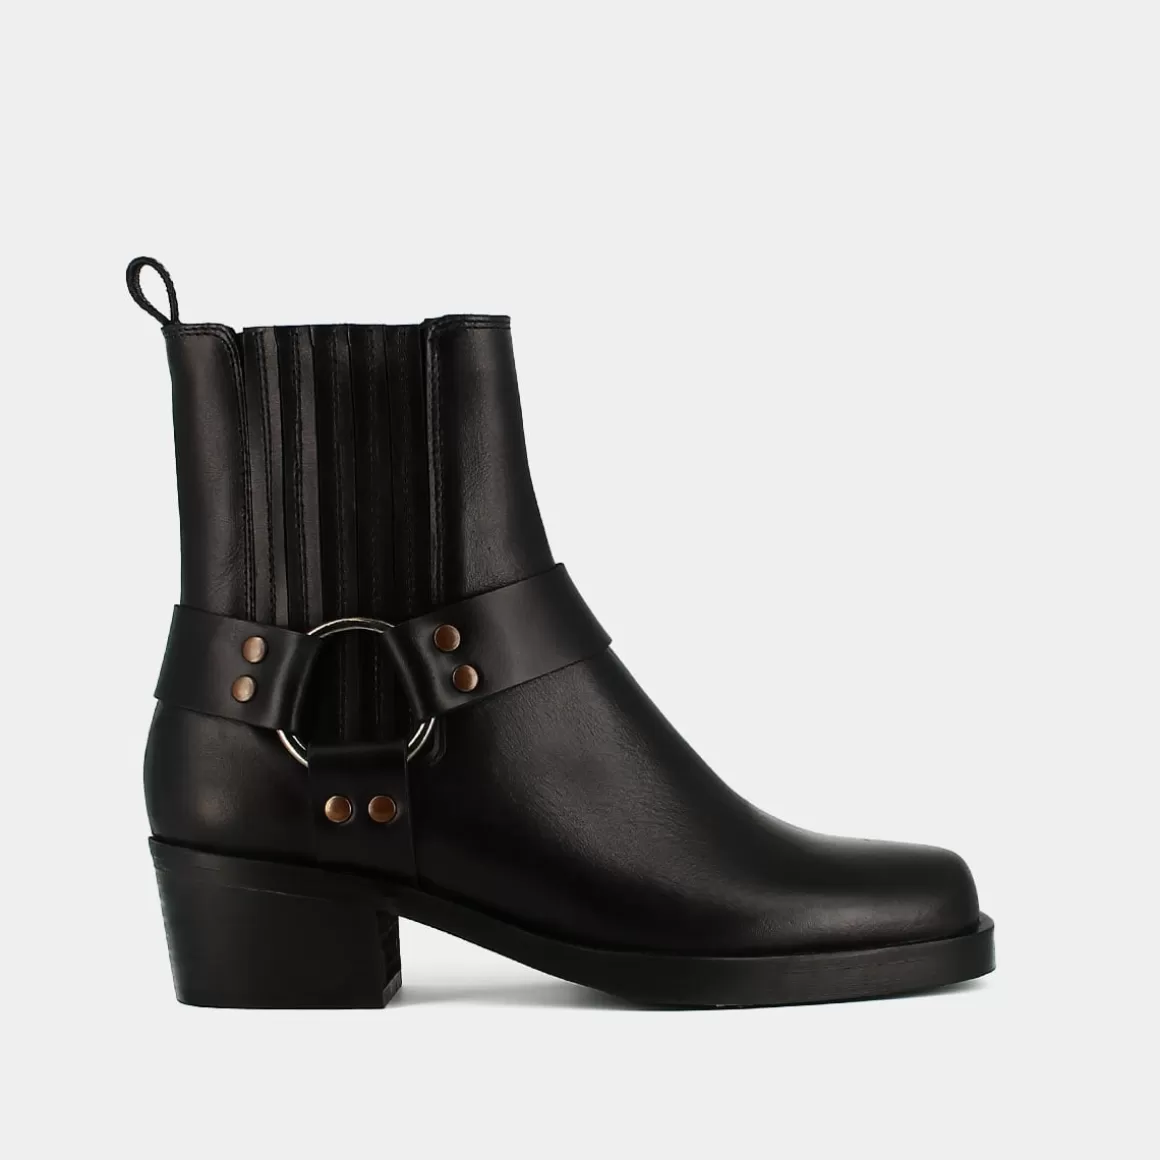 Ankle boots with buckles<Jonak Flash Sale